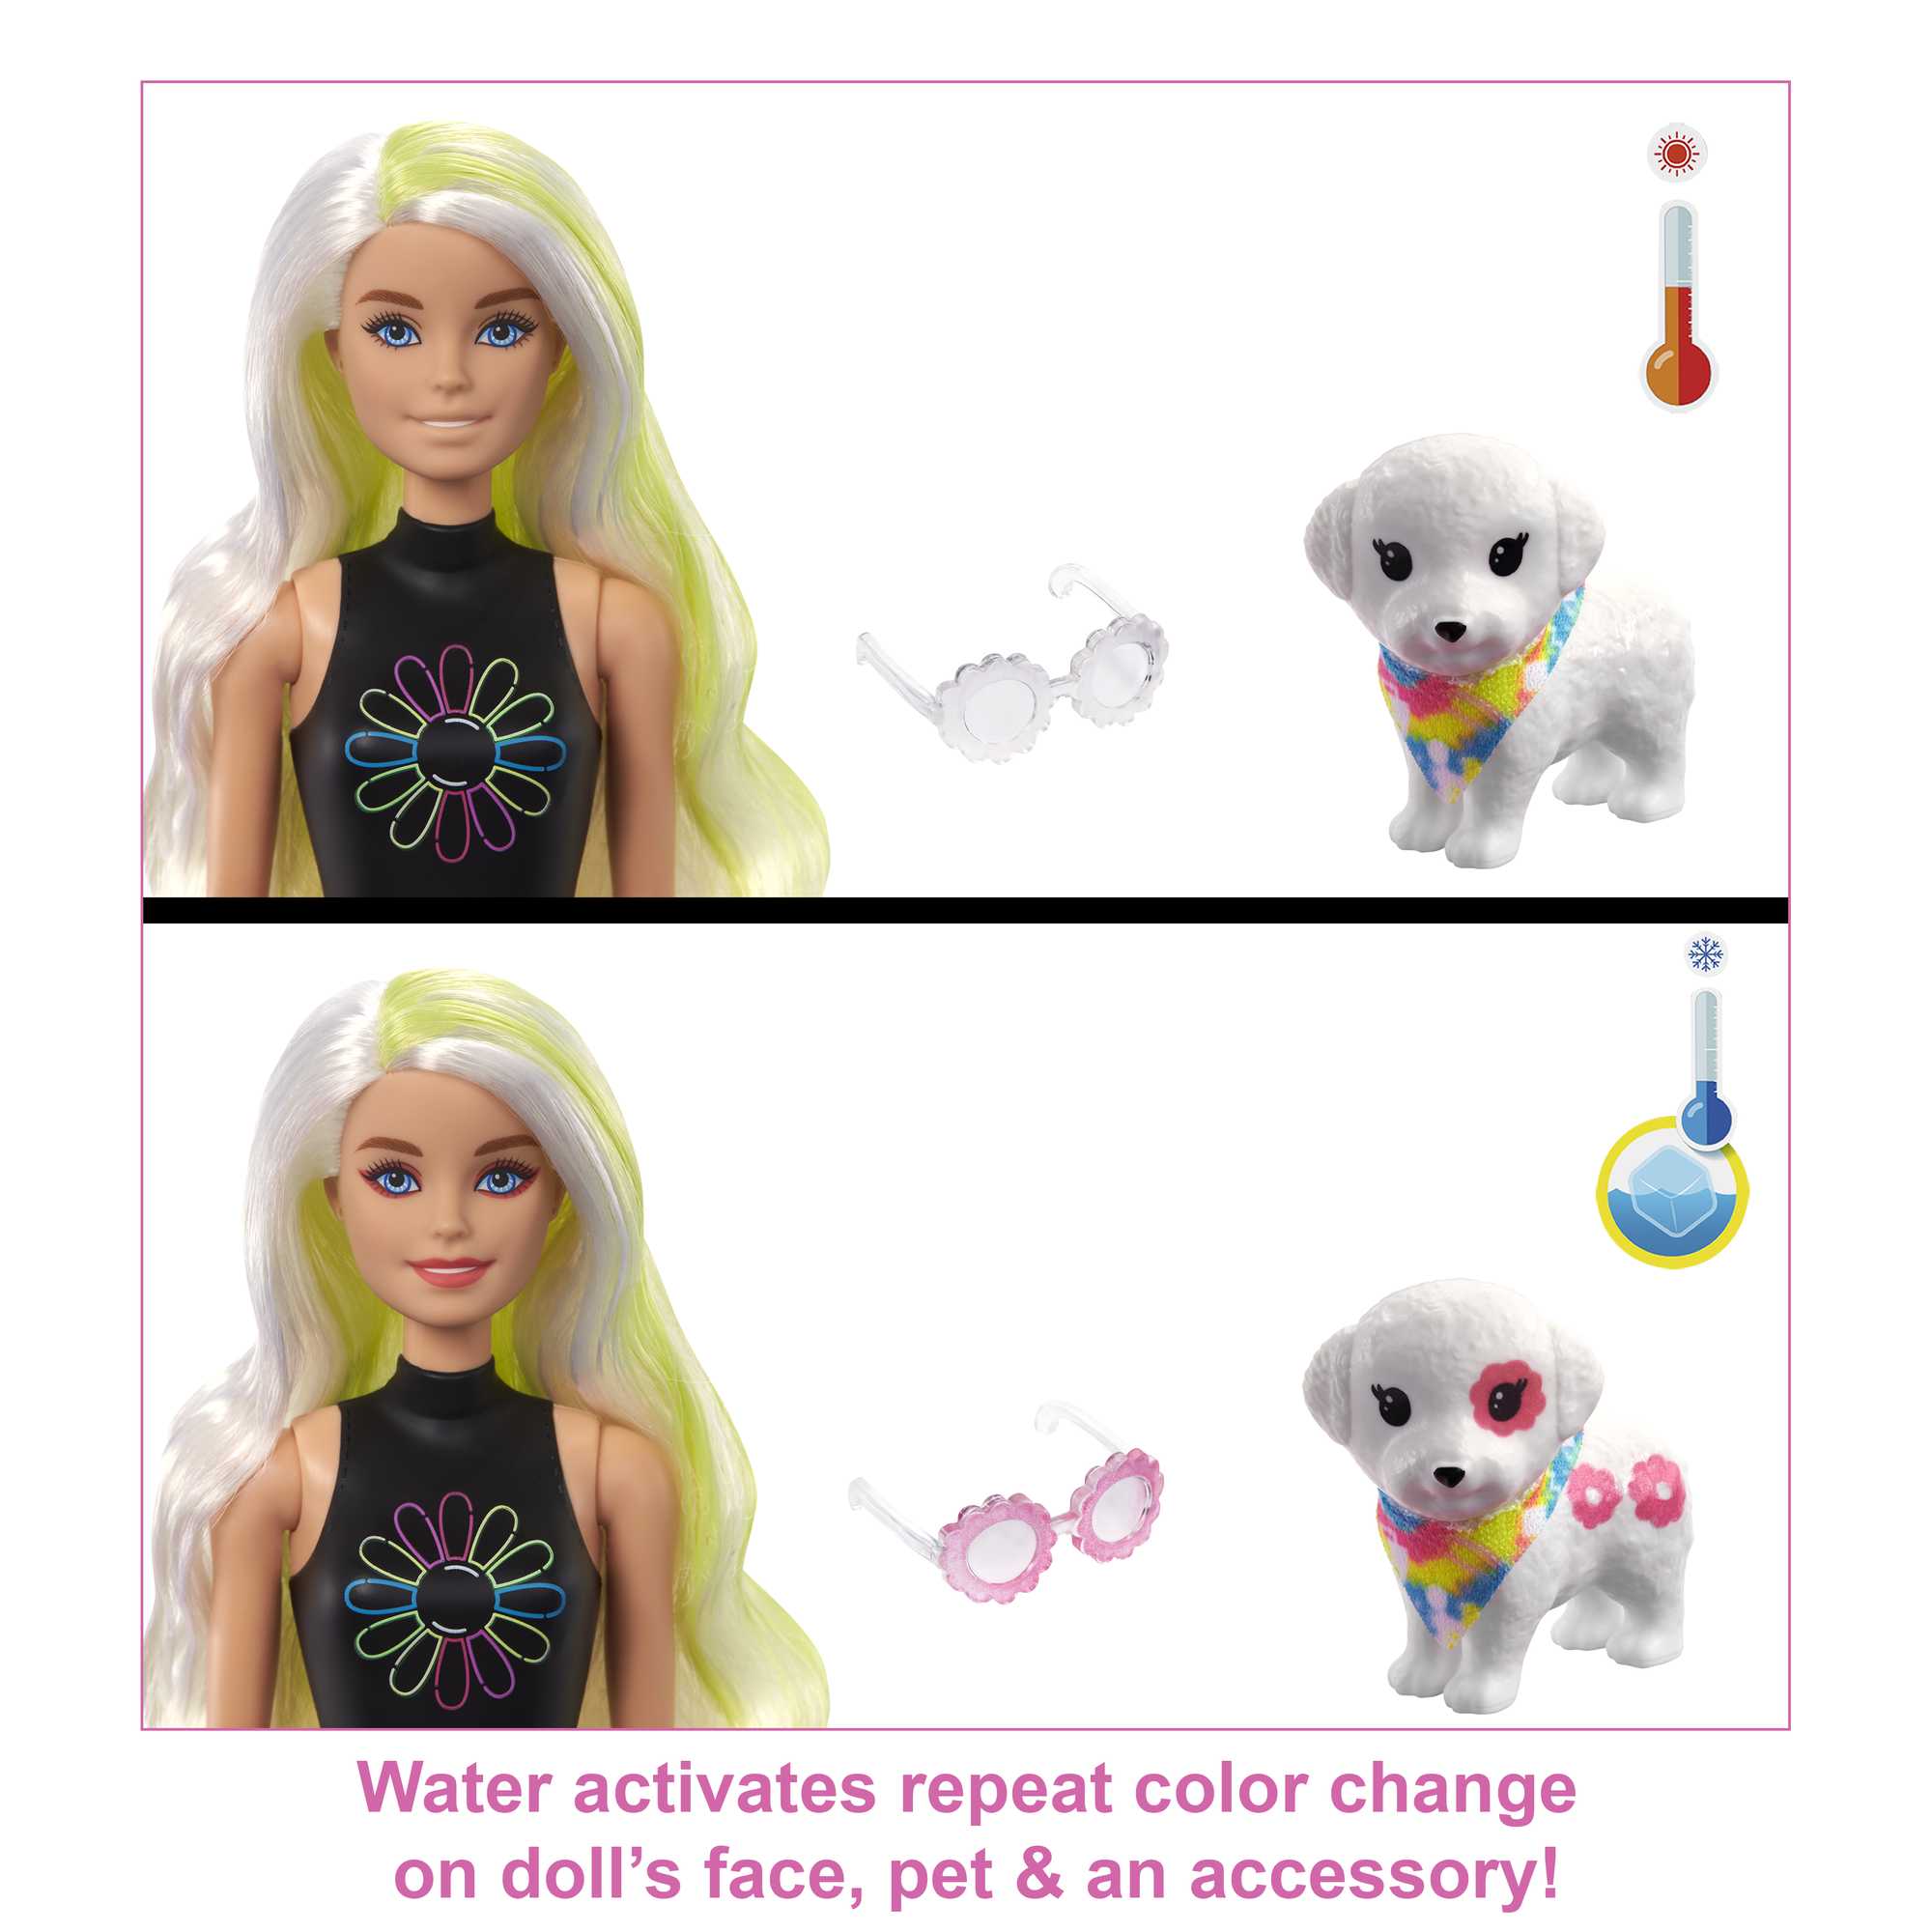 Barbie Color Reveal Chelsea Dolls and Pets